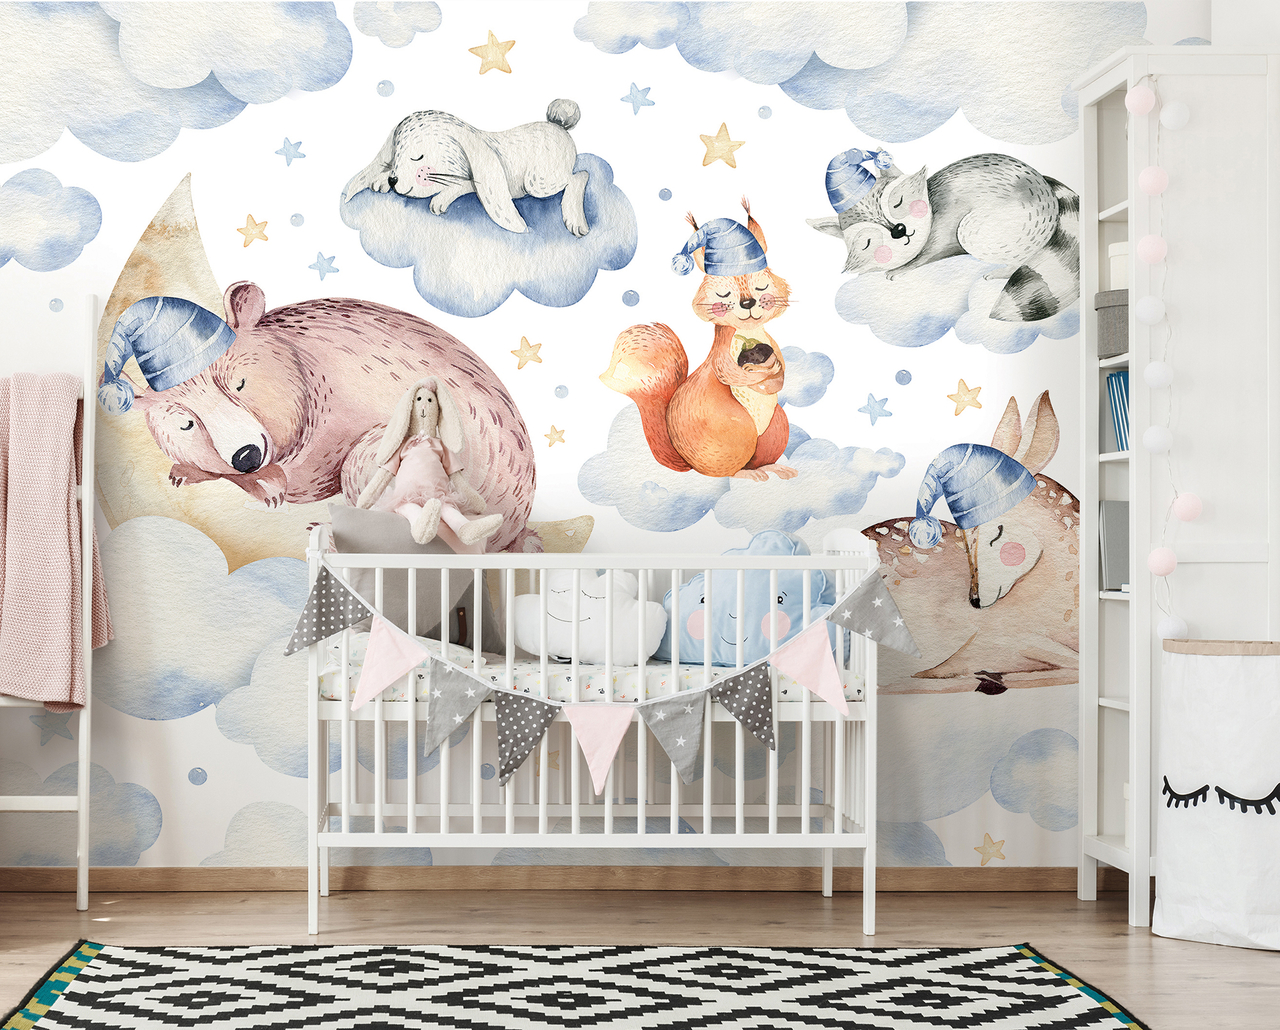 animals Wallpapers prints 10 Cute Ways to Use Removable Wallpaper for Your Kid’s Bedroom - 6